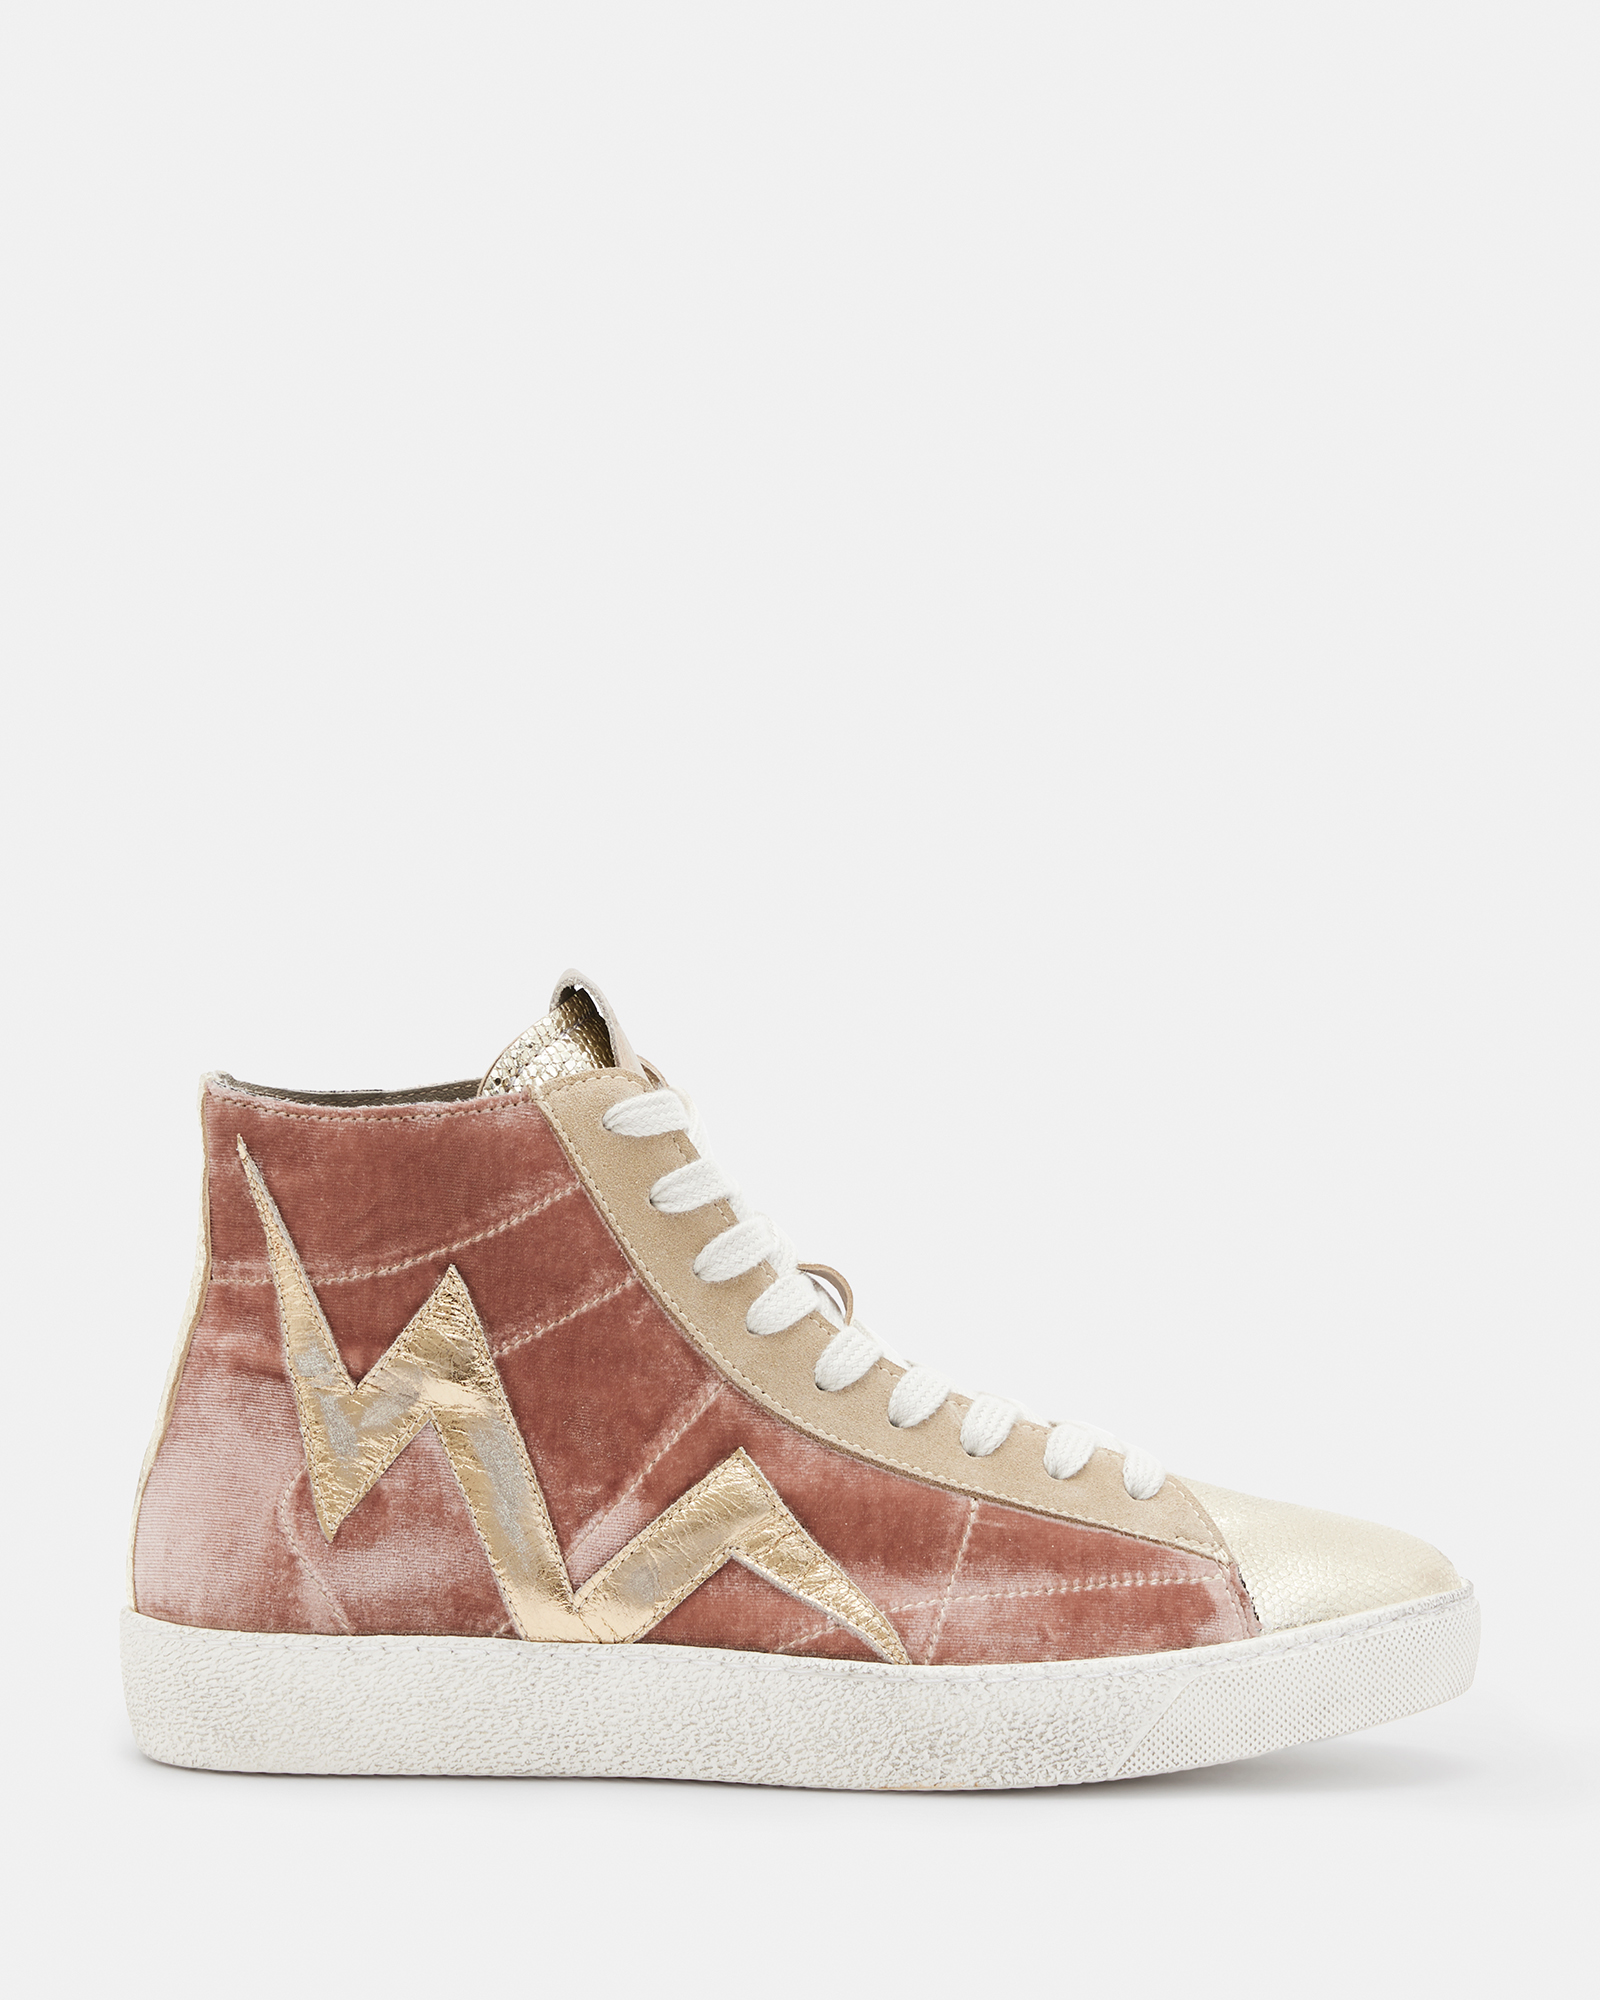 ALLSAINTS ALLSAINTS TUNDY BOLT LEATHER HIGH TOP TRAINERS